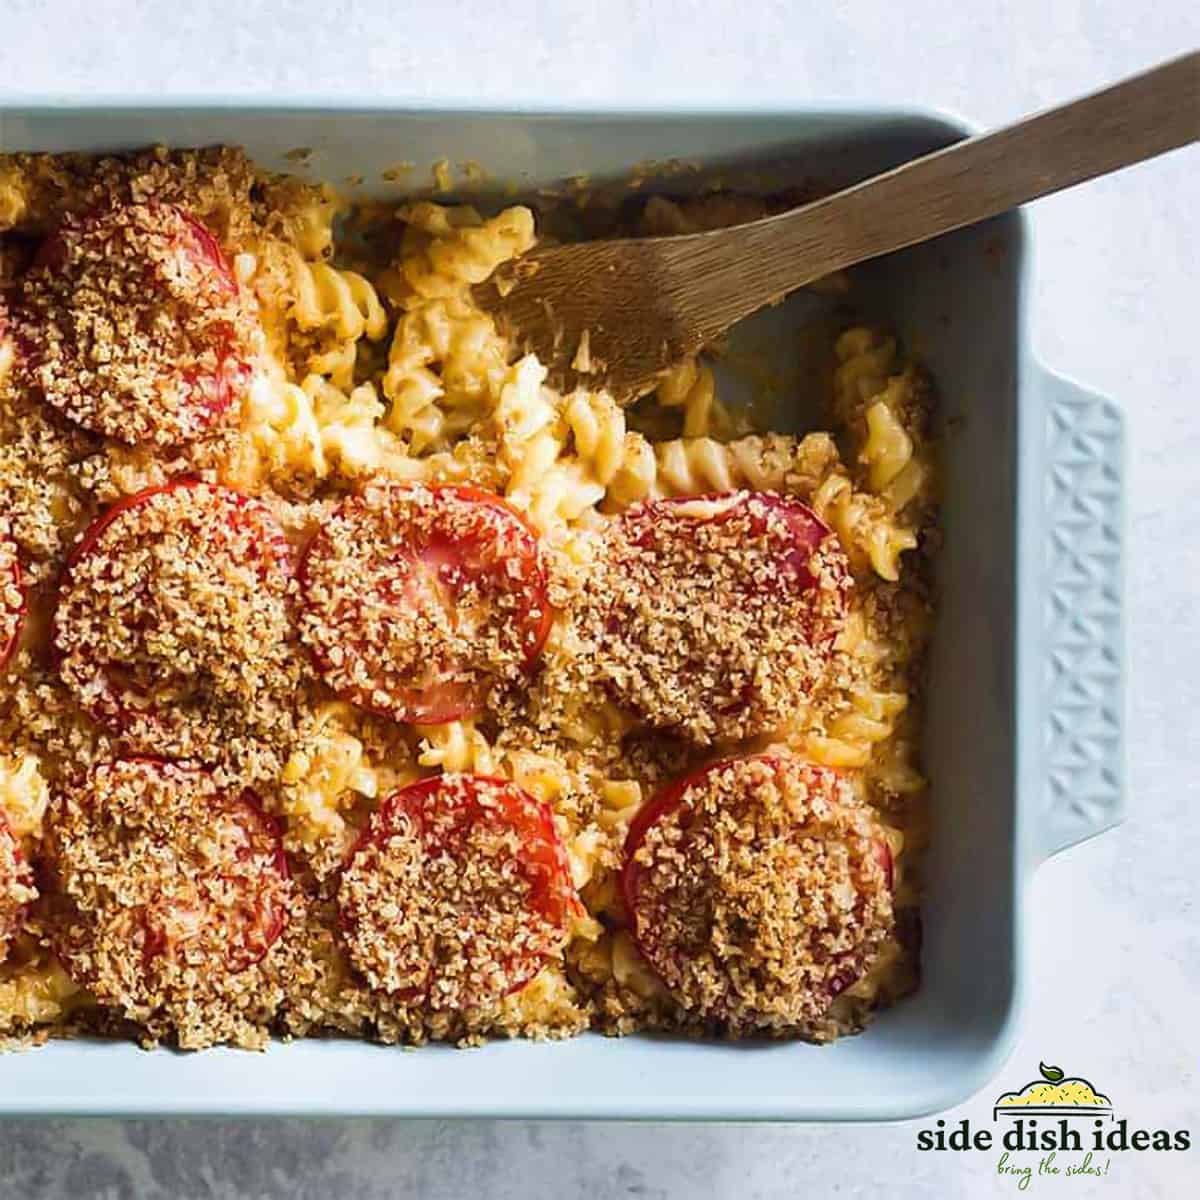 creamy baked mac and cheese in the baking dish topped with tomatoes and breadcrumbs